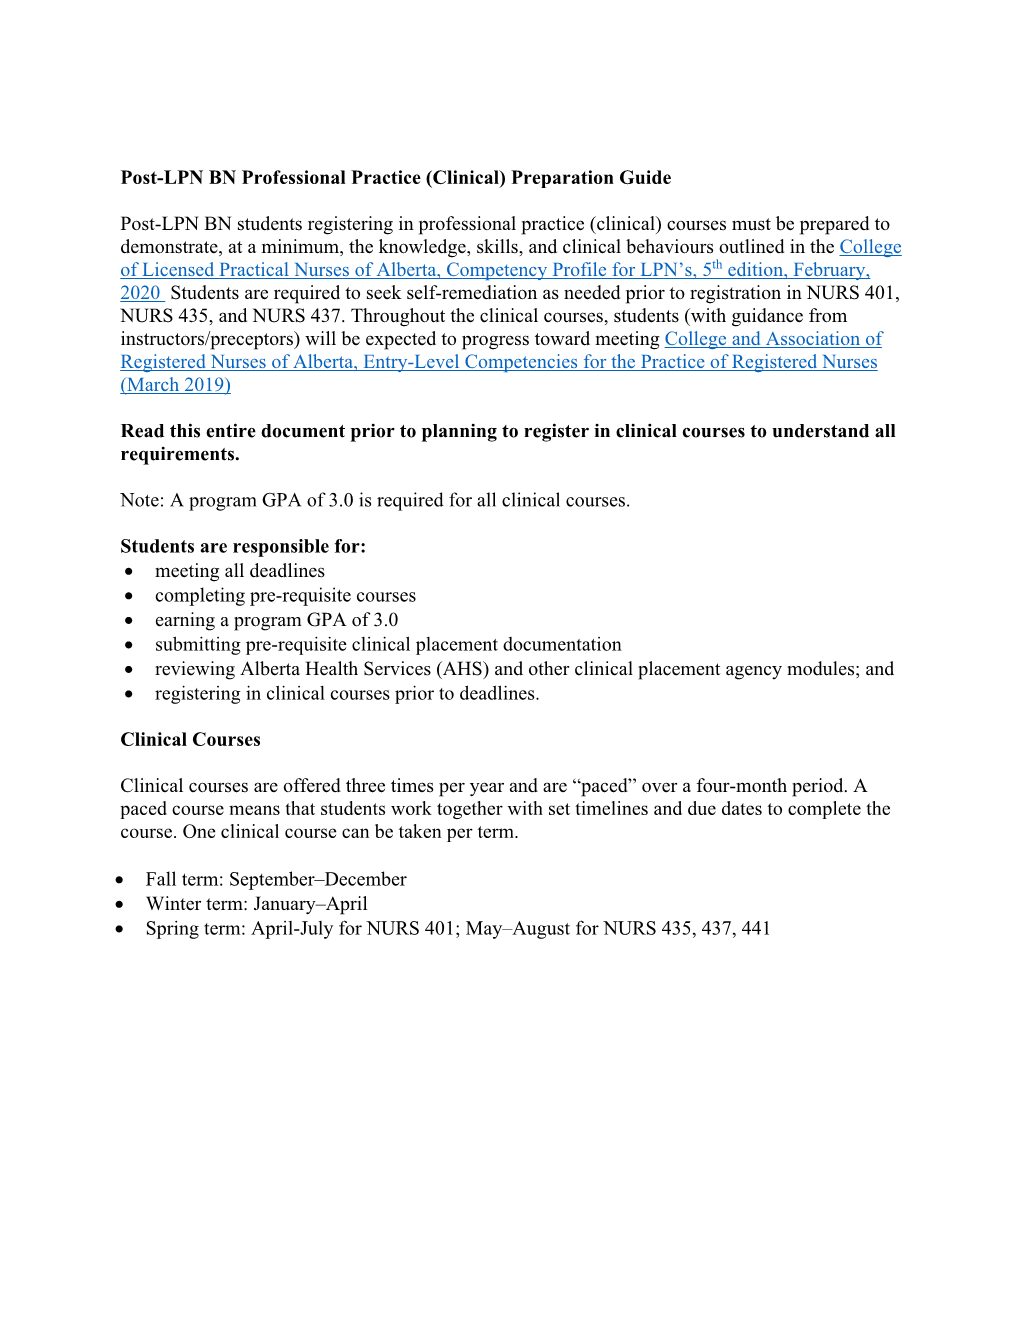 Post-LPN BN Professional Practice (Clinical) Preparation Guide